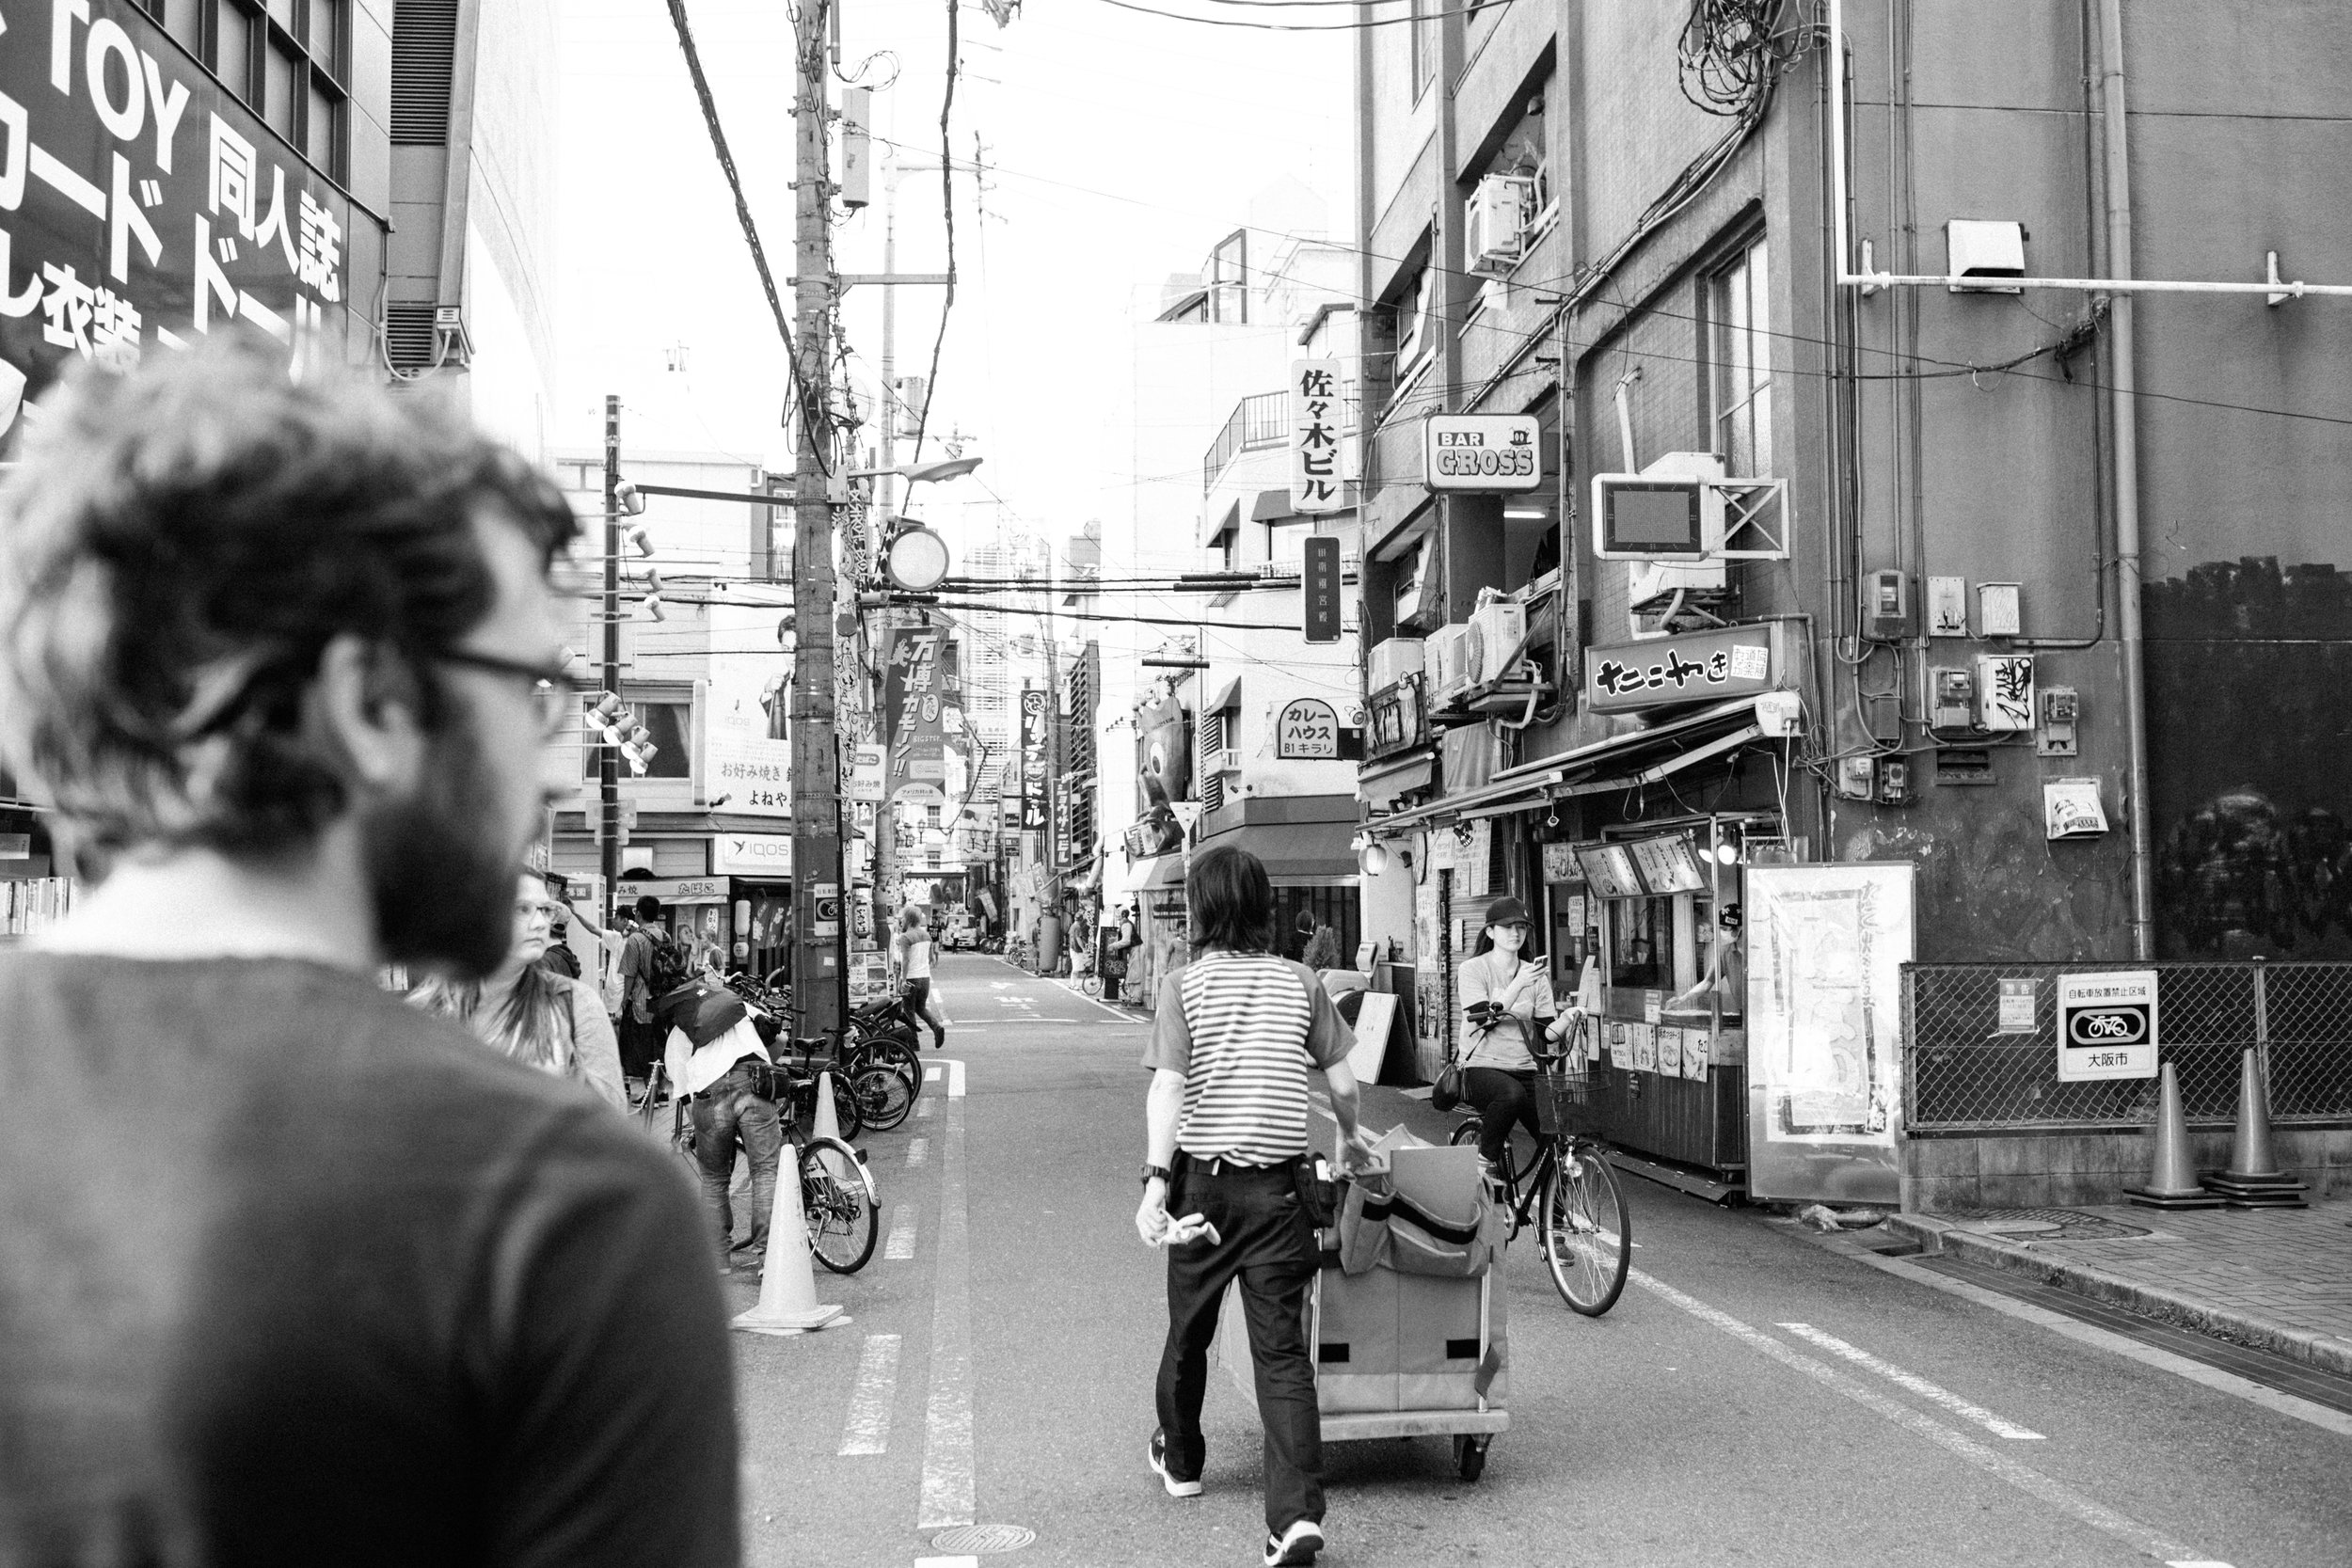  Back to city life: Exploring Osaka, the city known for street food 